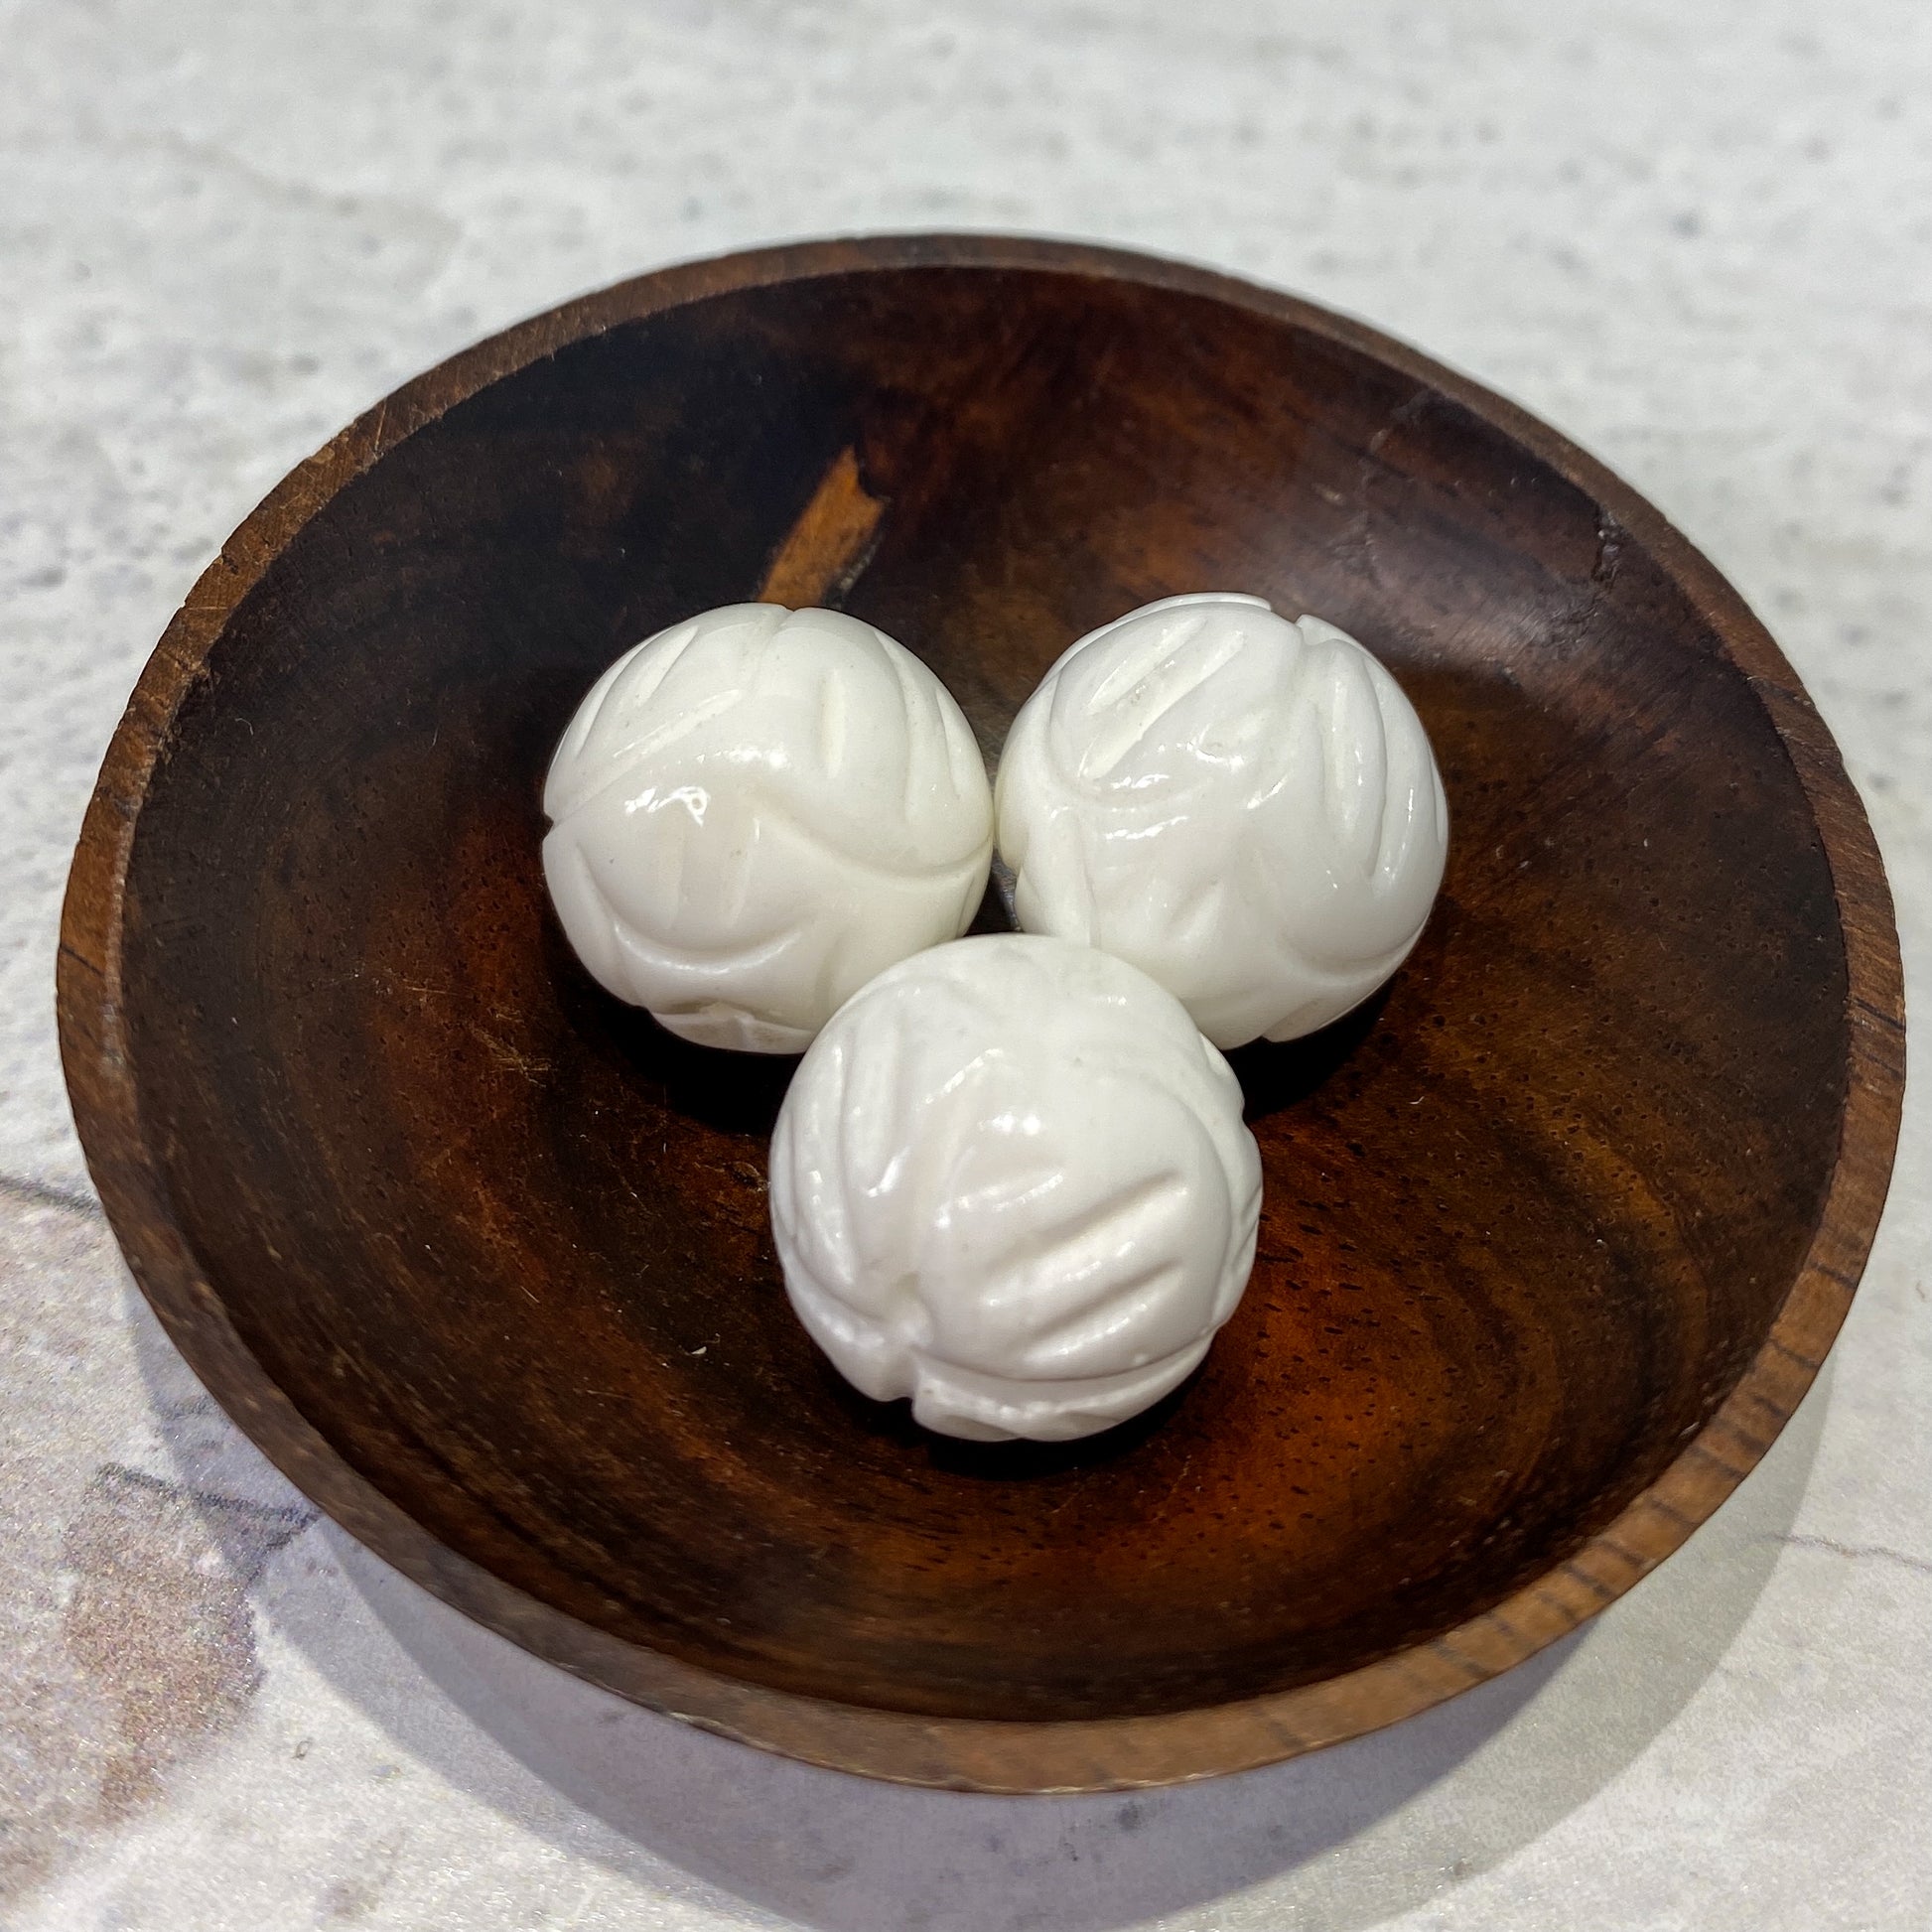 Tridacna Shell 14mm Round White Carved Lotus - 1 pc.